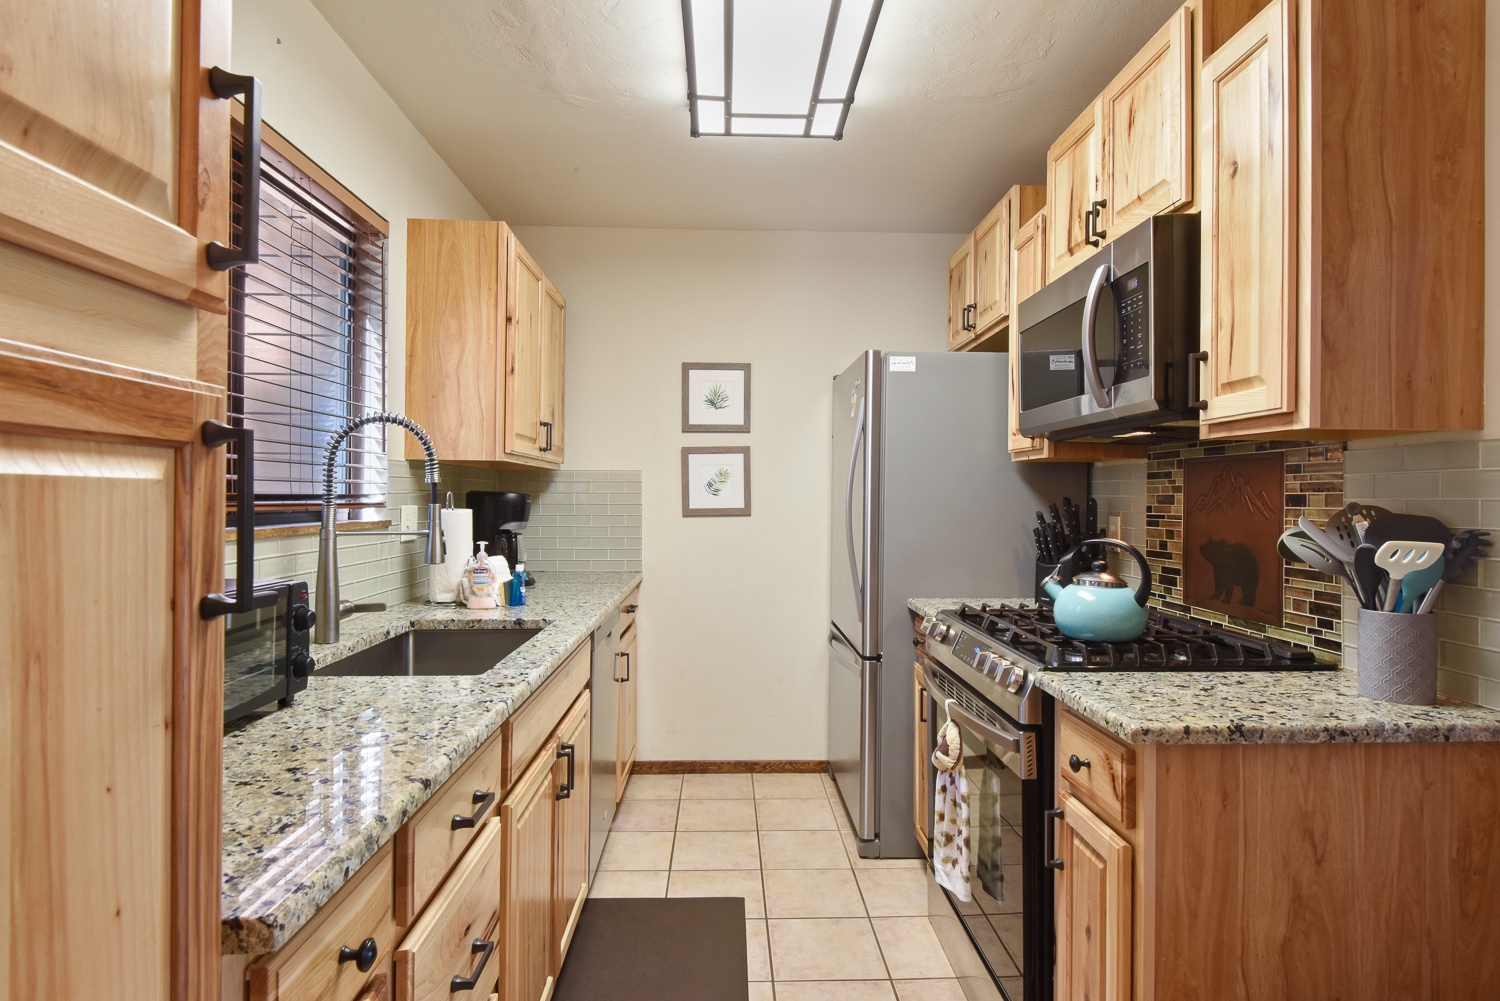 Unit #2: The updated kitchen boasts ample storage space & all the comforts of home